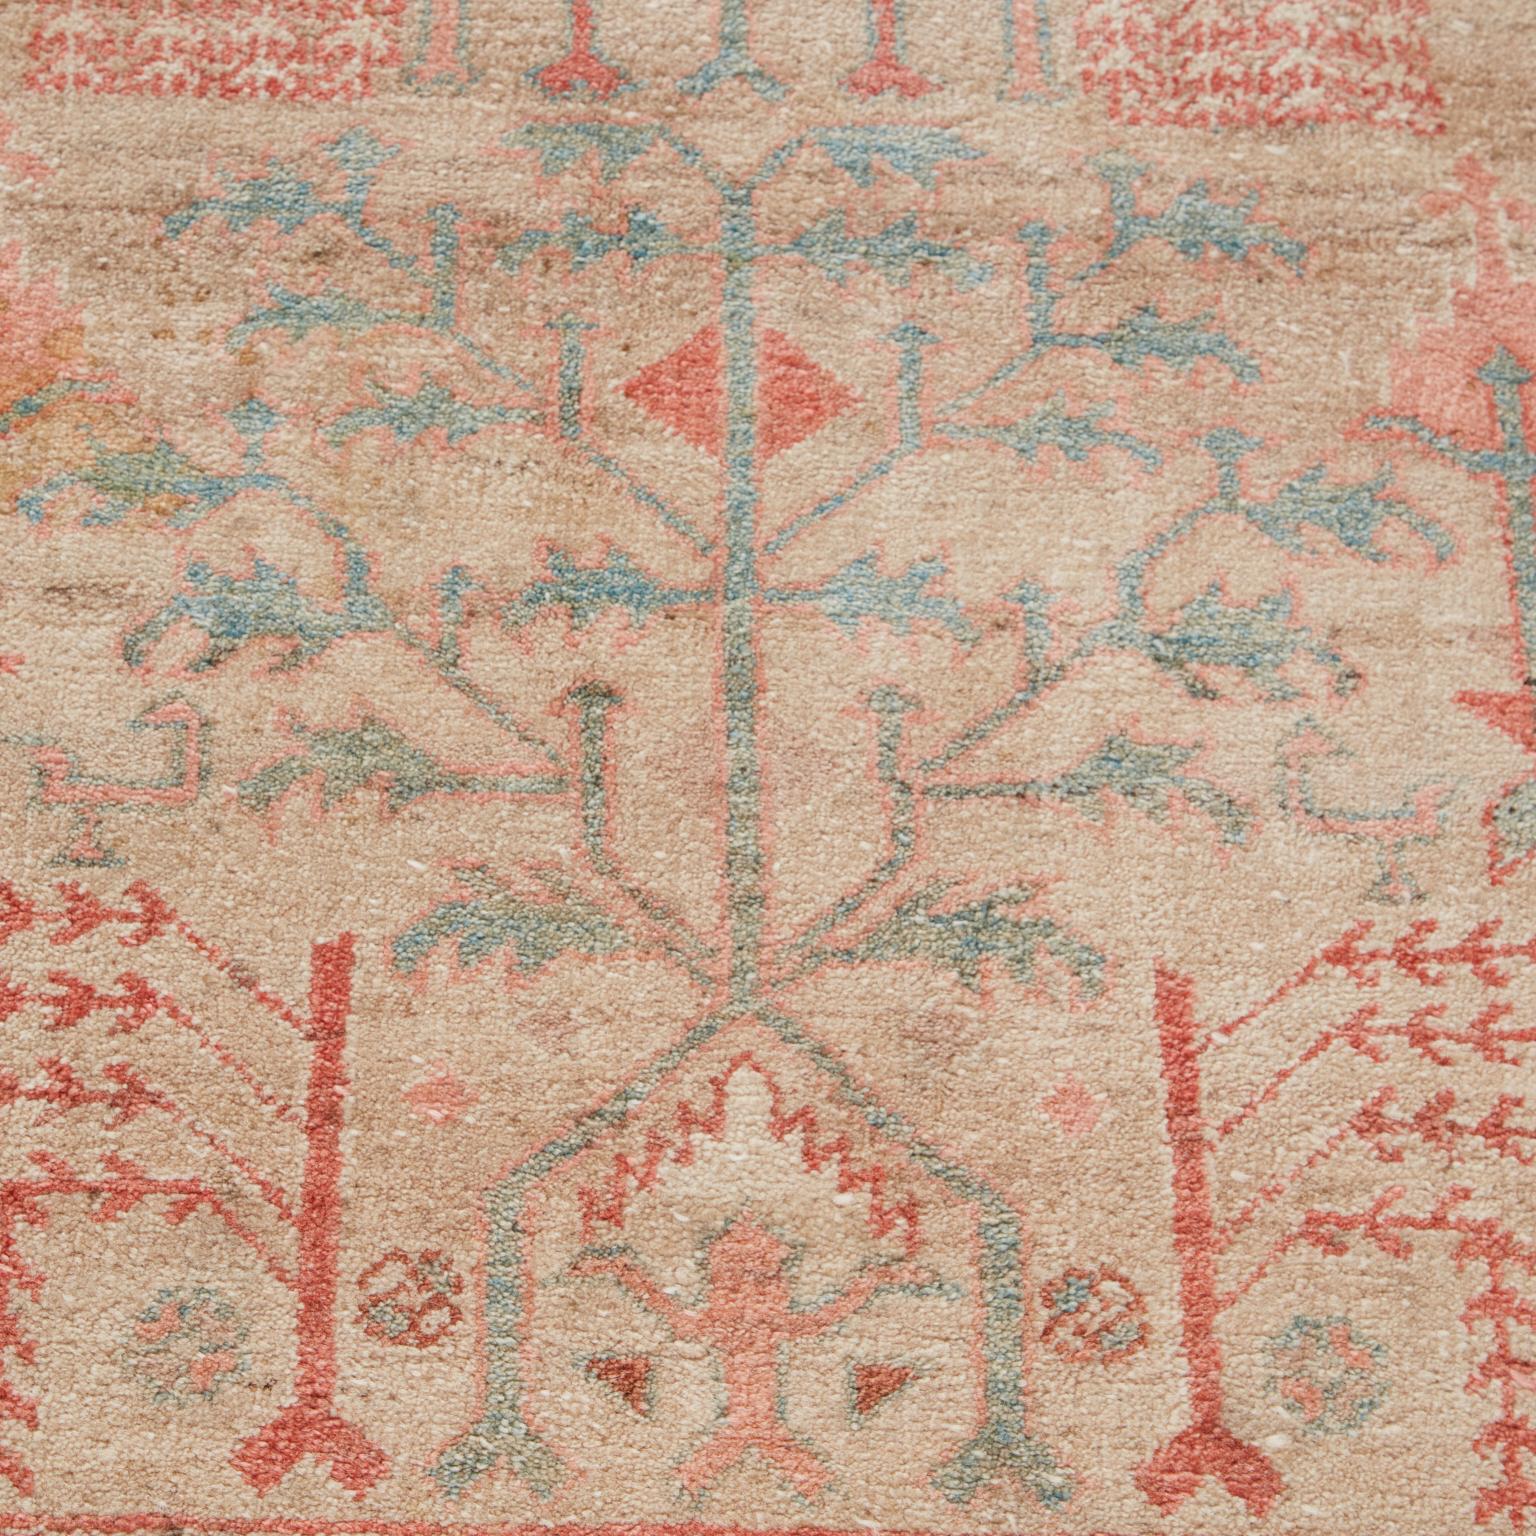 Malayer Style Rug Weeping Willow Tree of Life Design 7